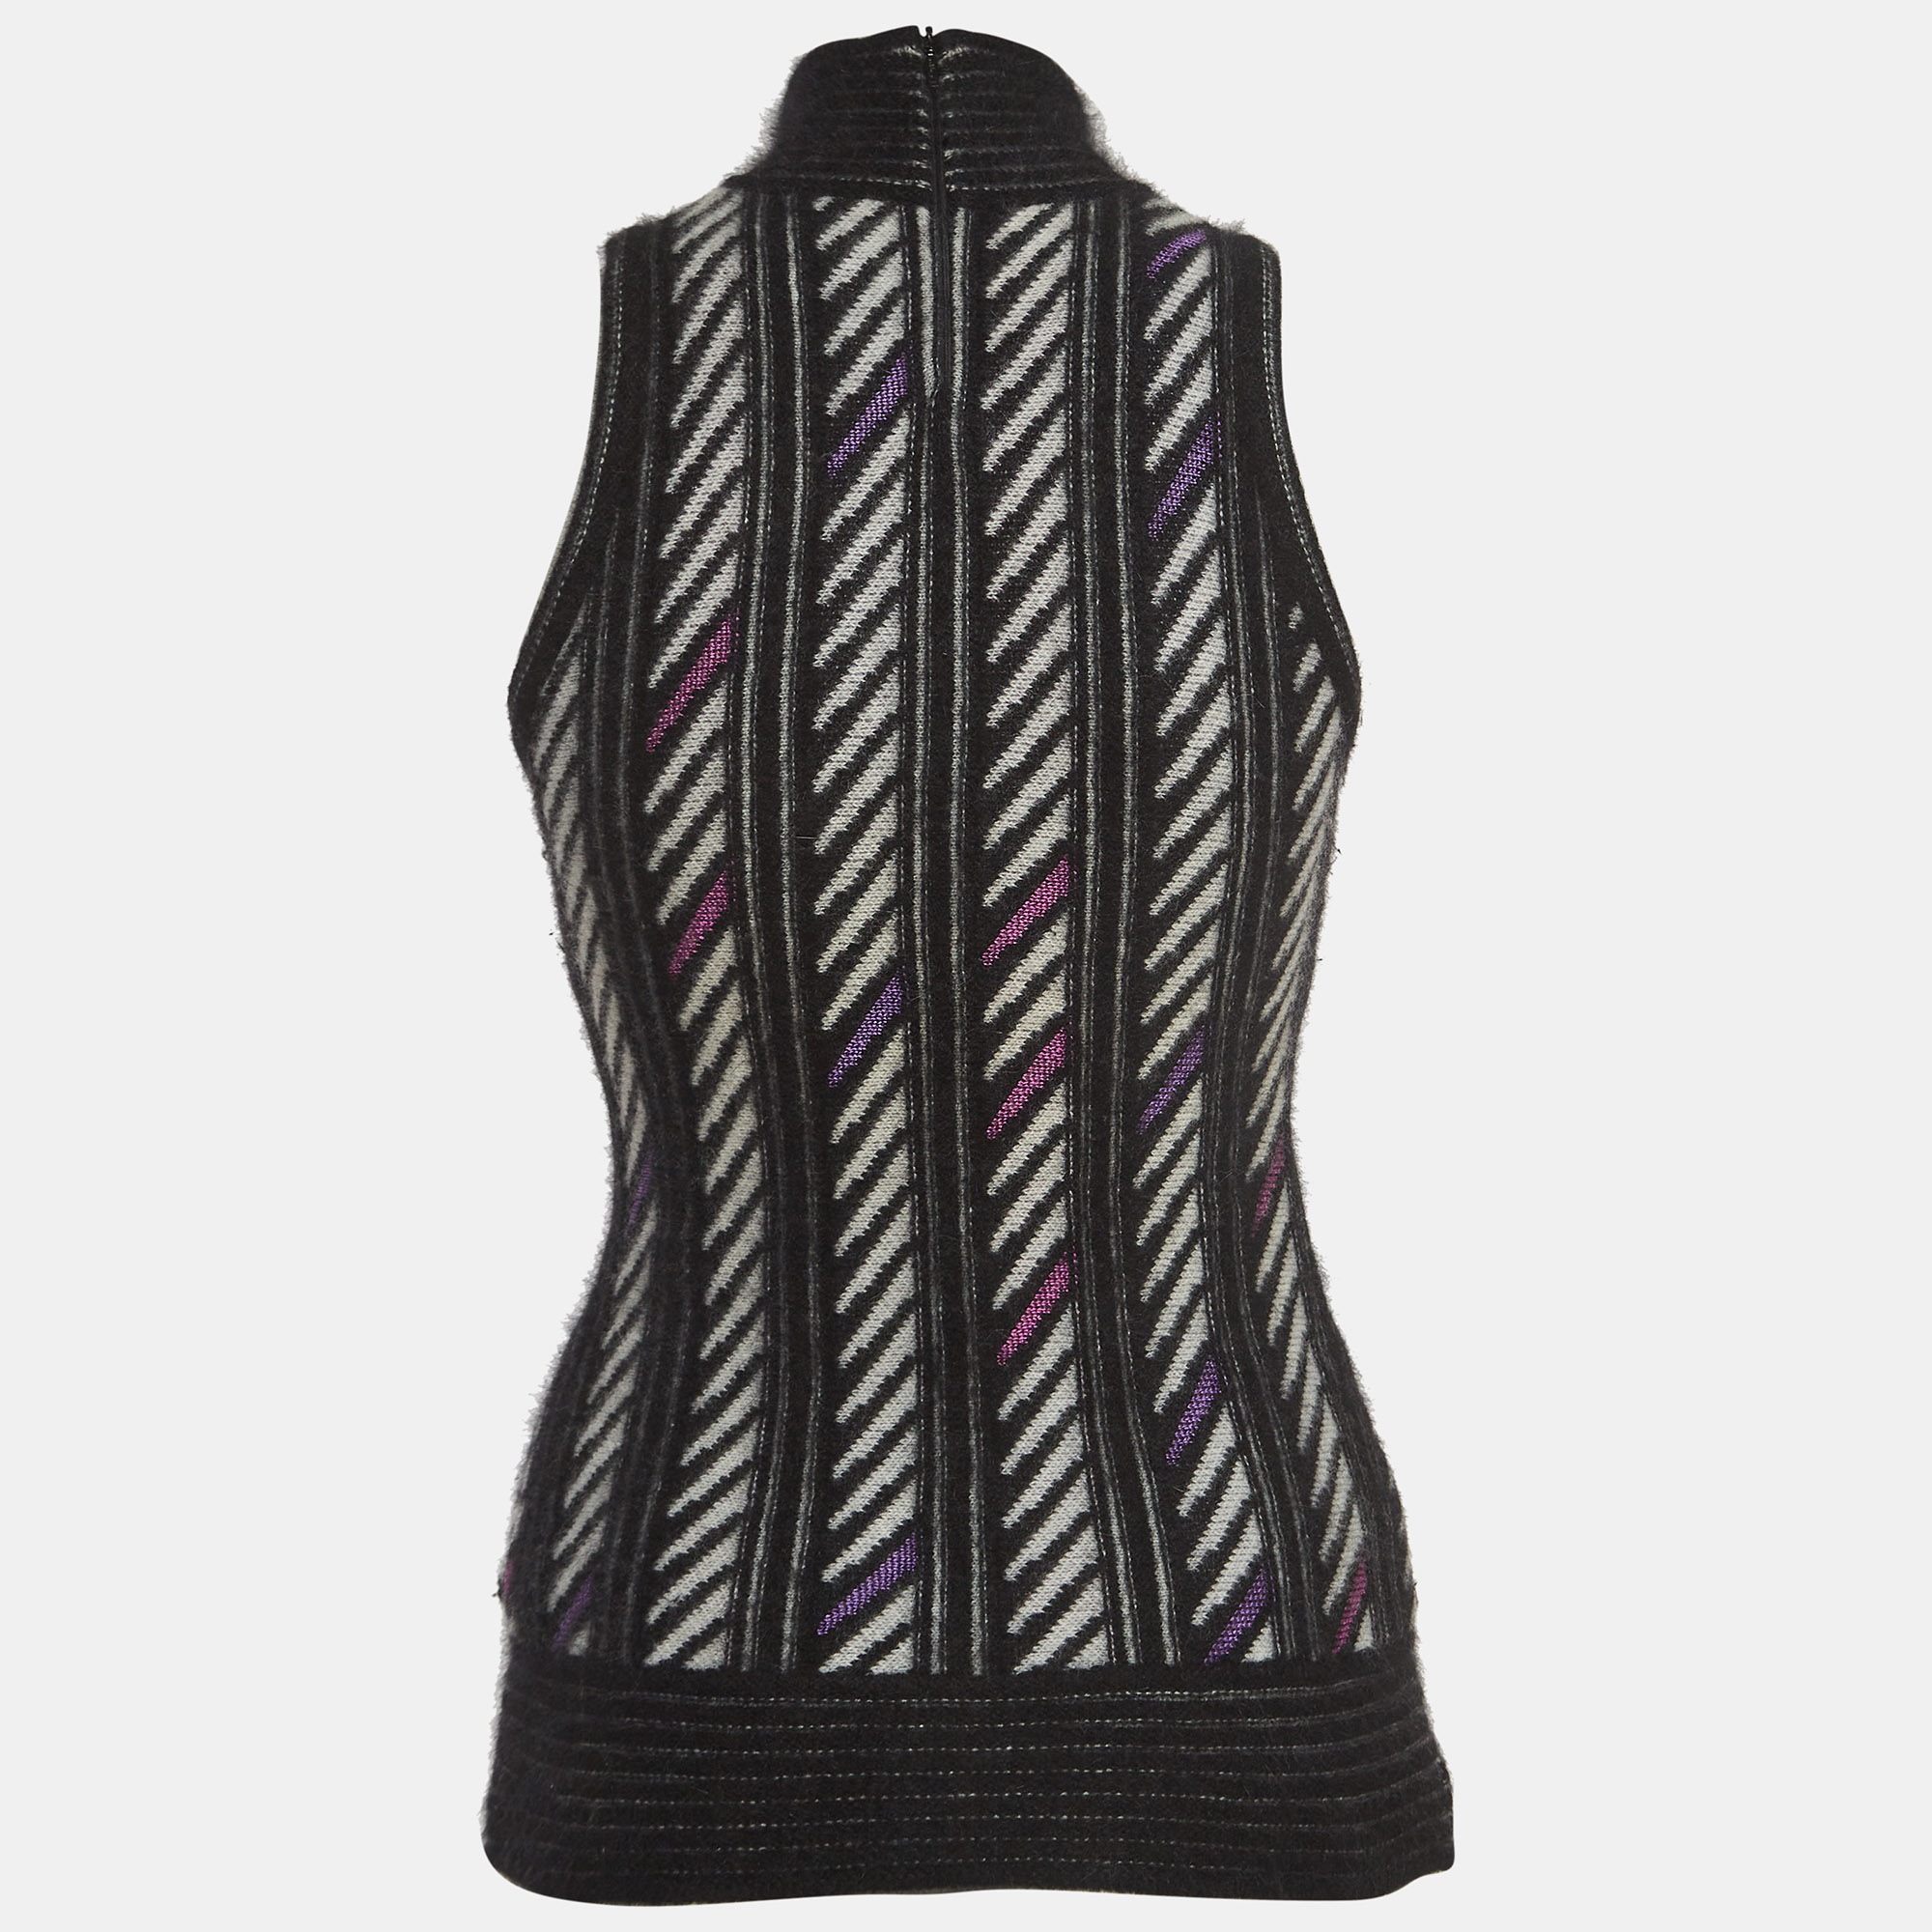 

Gucci Black Patterned Cashmere Blend Sleeveless High Neck Sweater Top